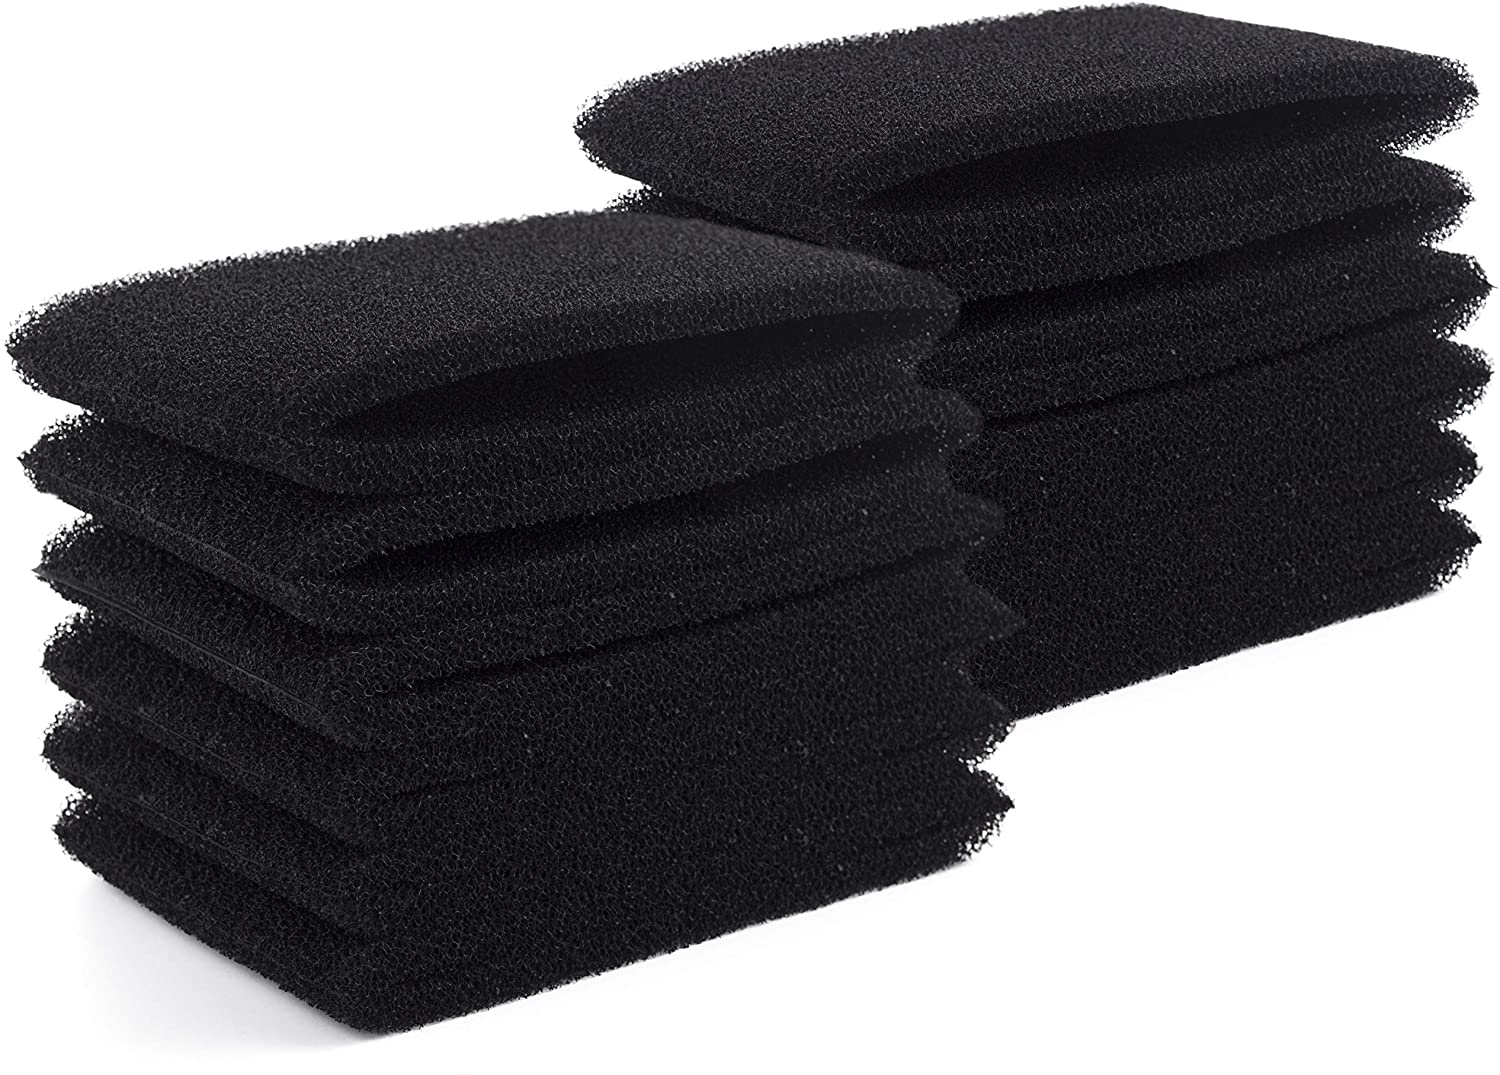 LTWHOME Replacement Foam Sleeve Filter Fit for Shop-Vac Wet Dry Vacuums Cleaners, Compare to Part 90585 & 9058500 Type R (Pack of 12)